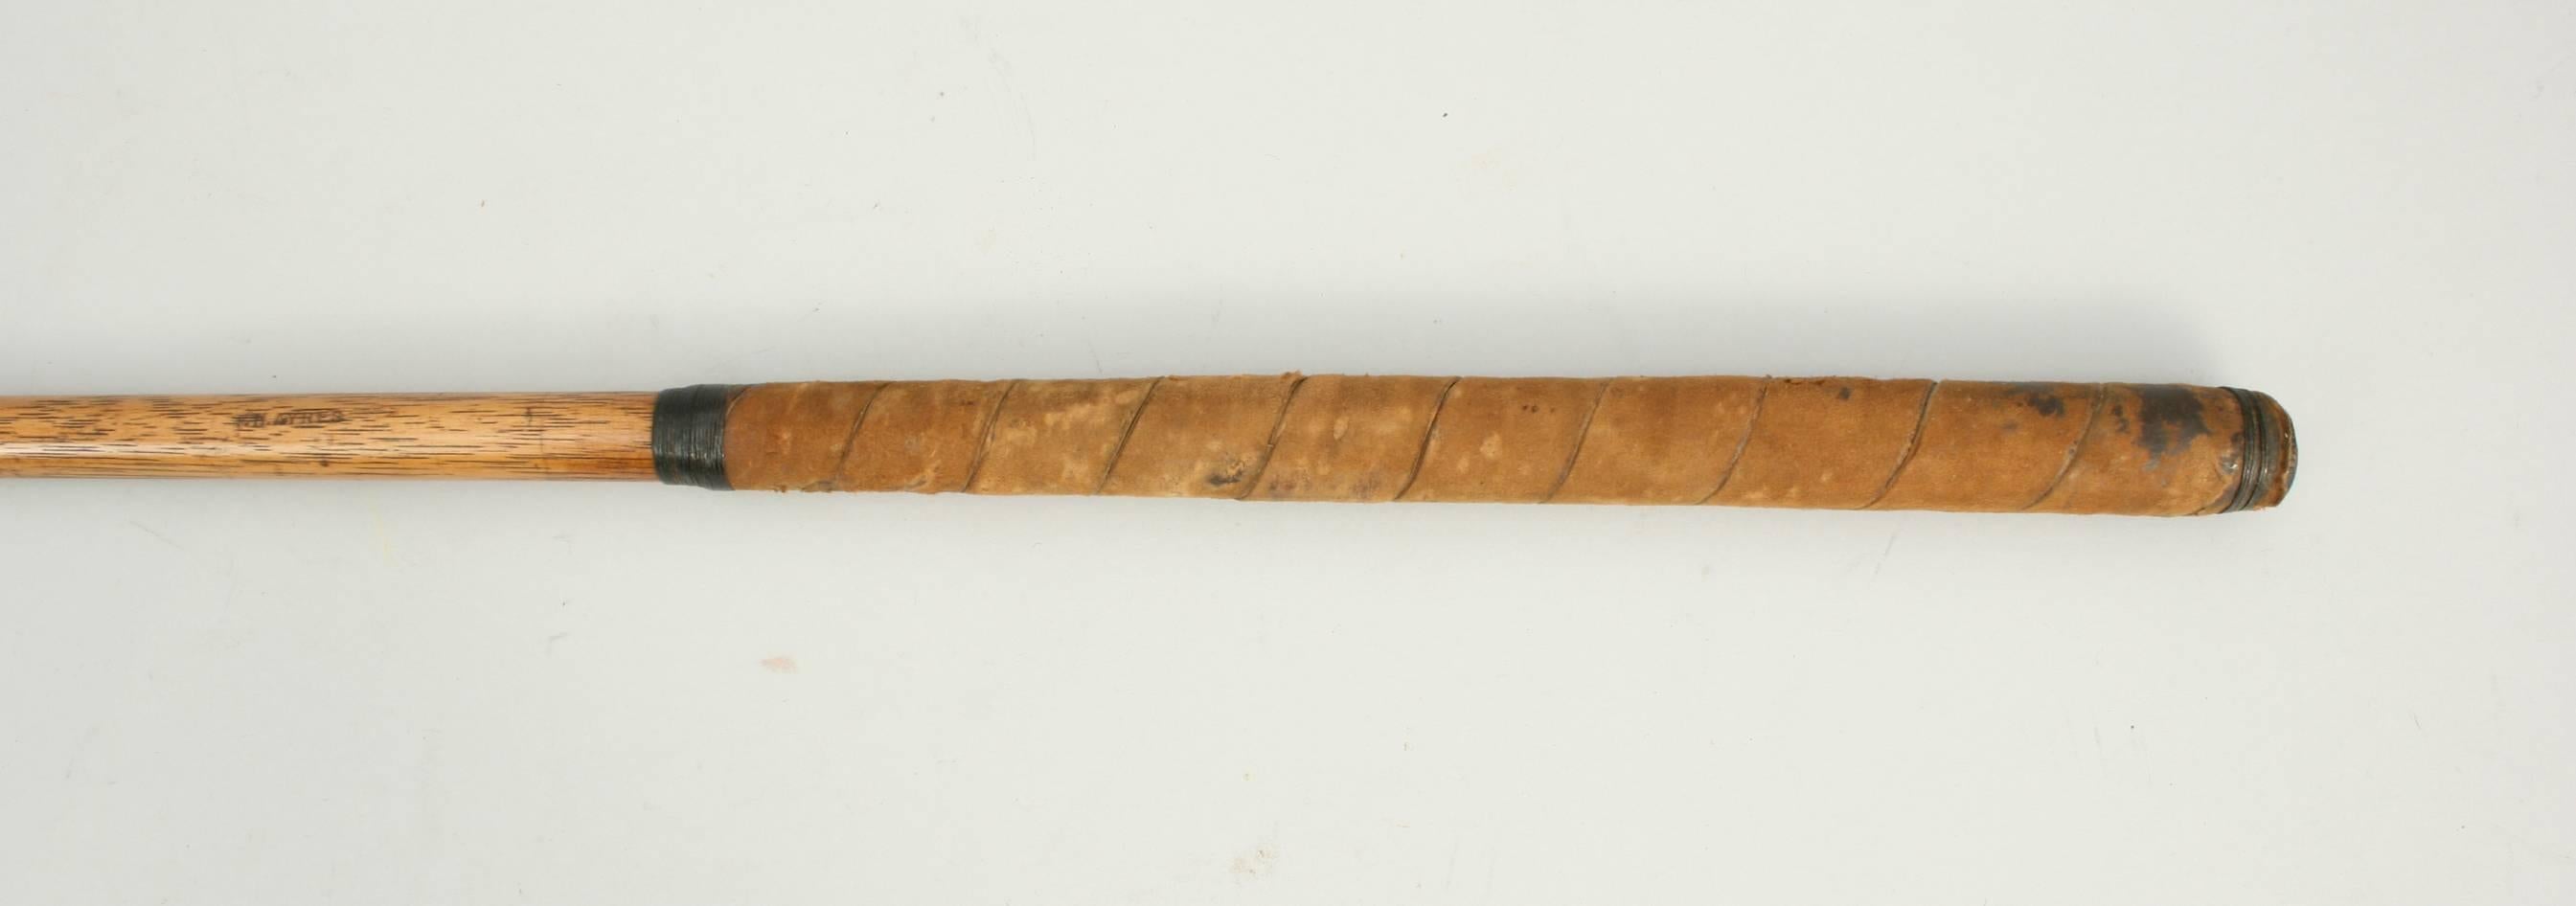 Late 19th Century Antique Hickory Shafted Golf Club, Smooth Face. 19th Century